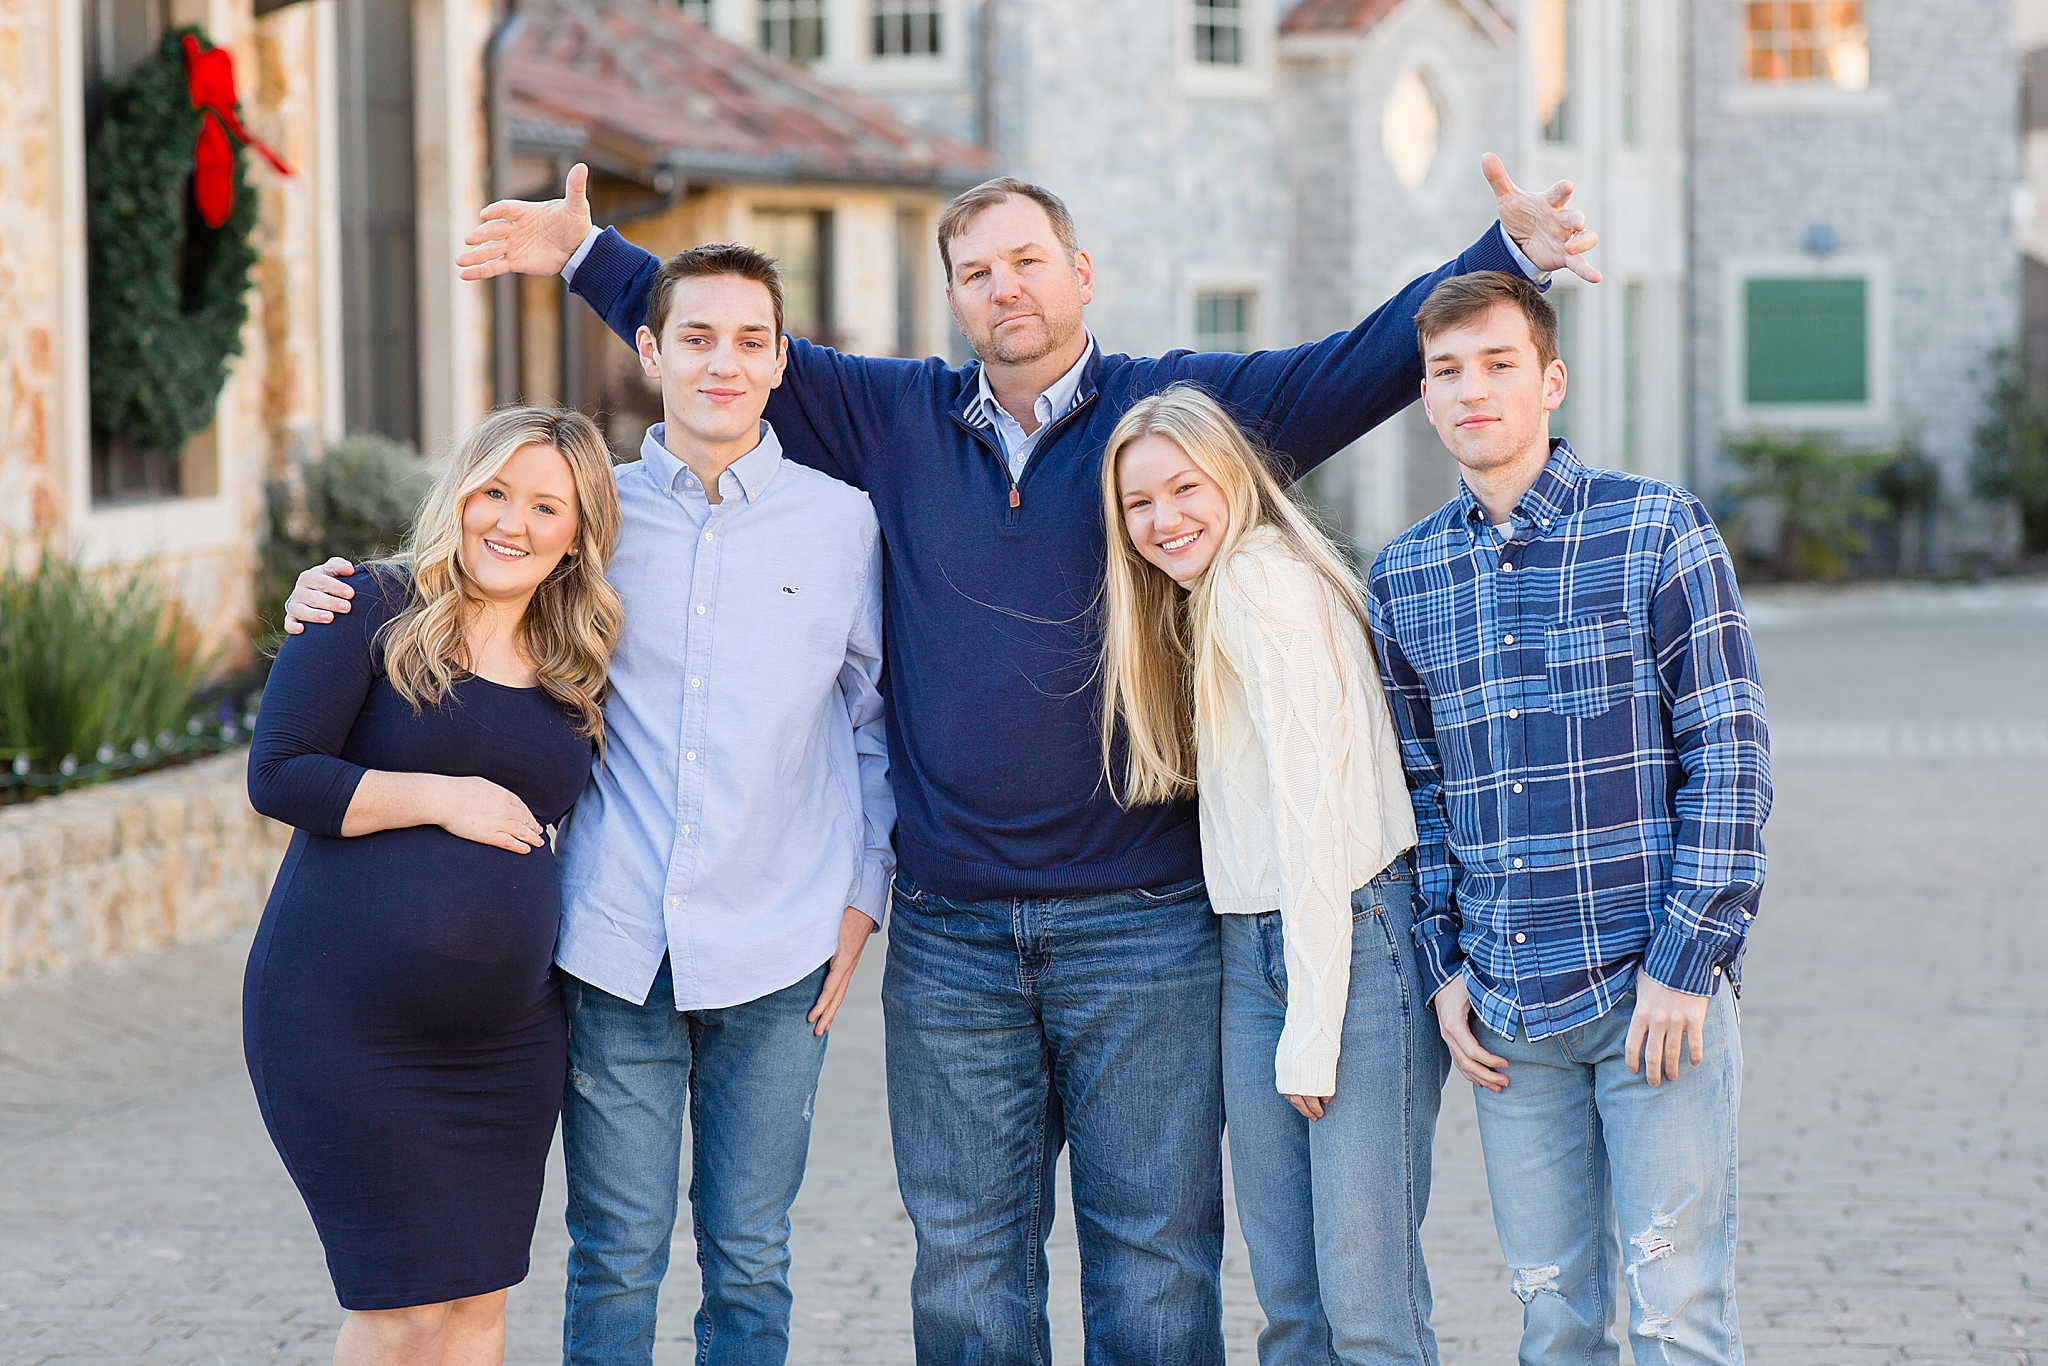 dad makes funny pose during TX family photos